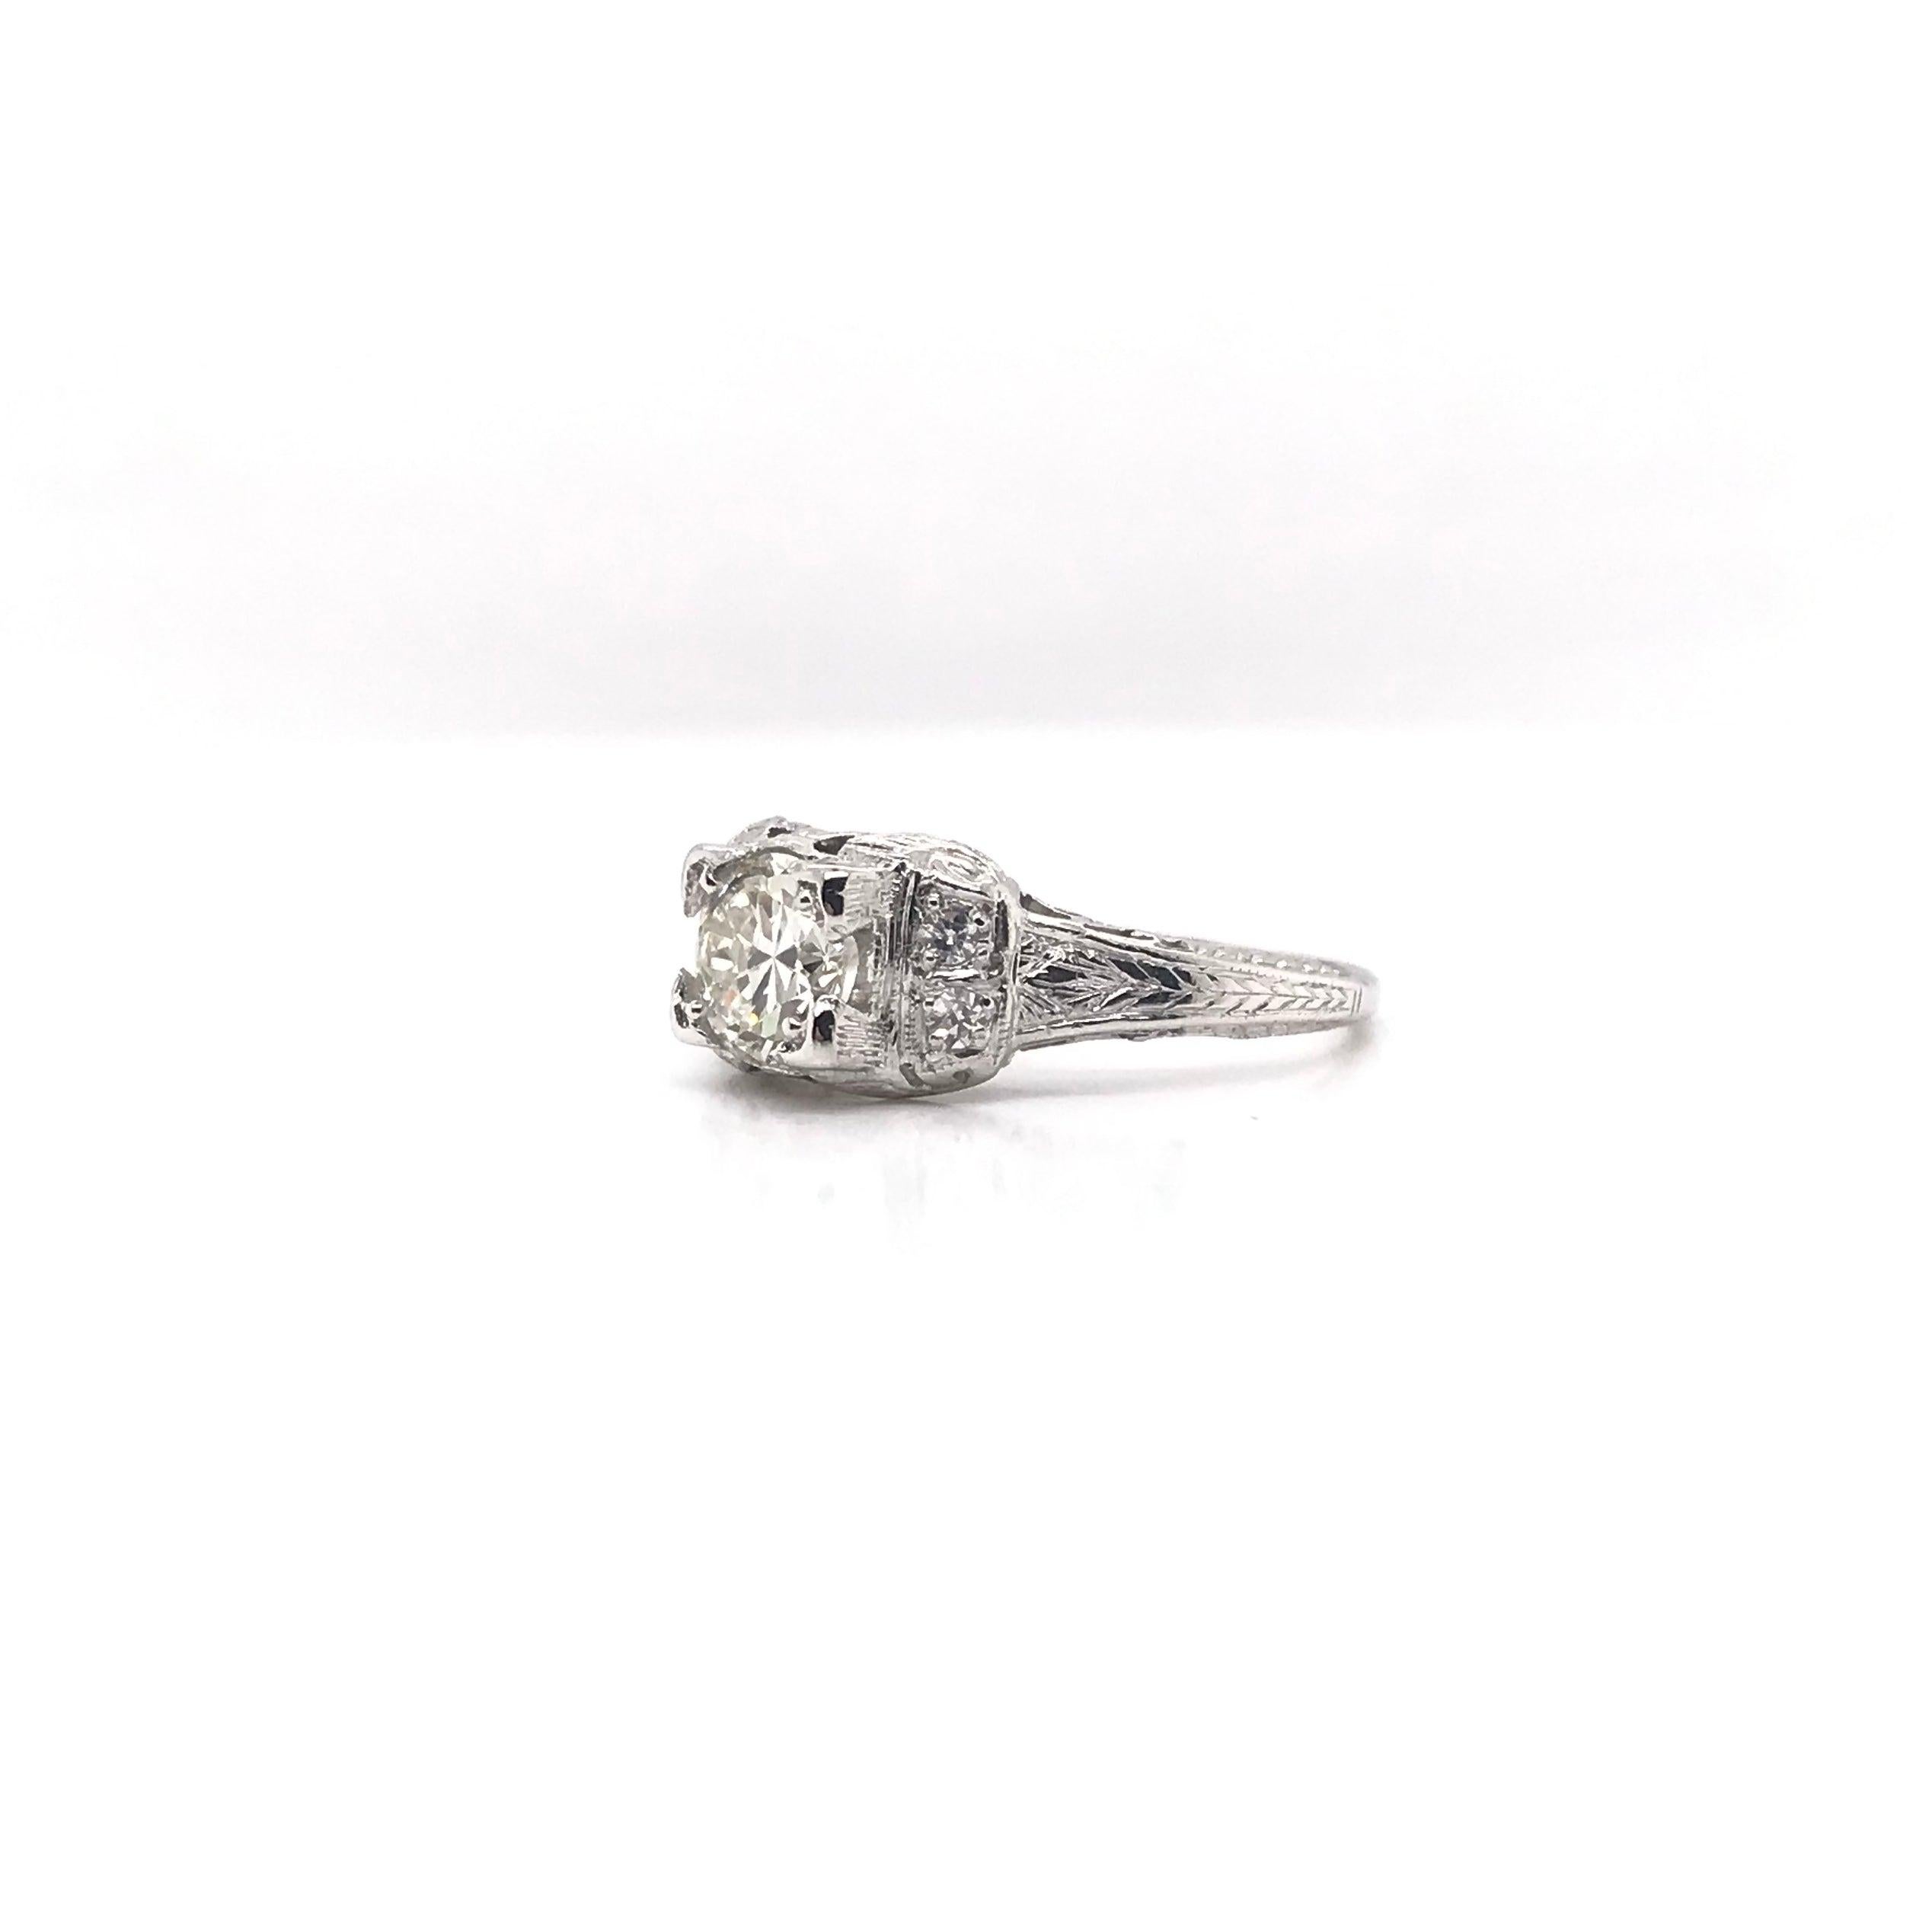 This antique piece was handcrafted sometime during the Edwardian design period ( 1900-1915 ). The platinum filigree setting features a gorgeous 0.74 carat center diamond that grades J in color, SI1 in clarity. The setting features enchanting floral